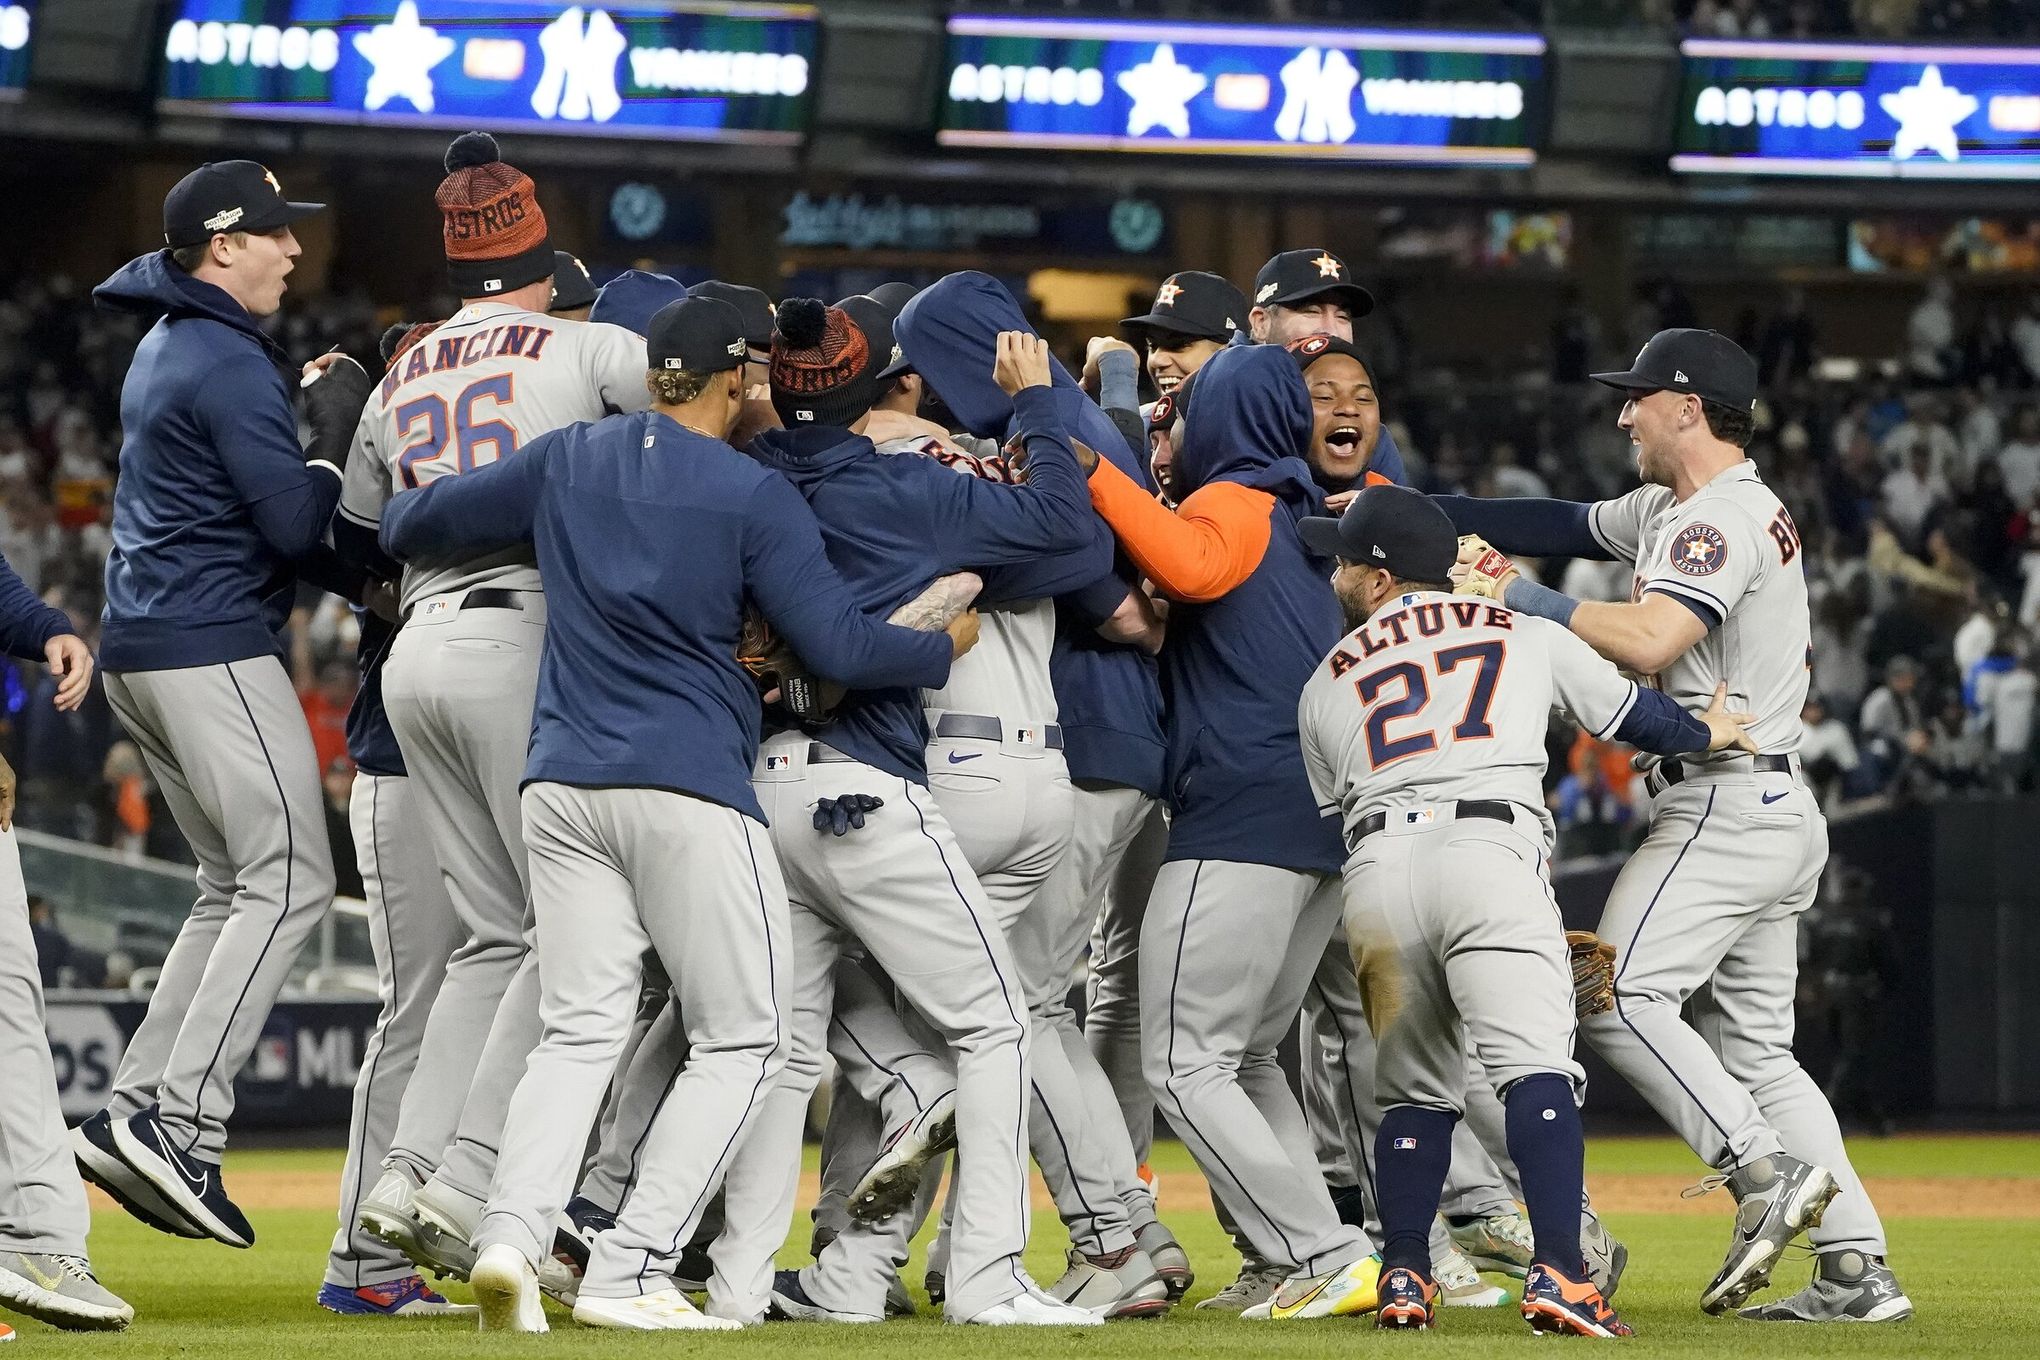 Astros fans thrilled to see team in World Series, despite Game 1 loss